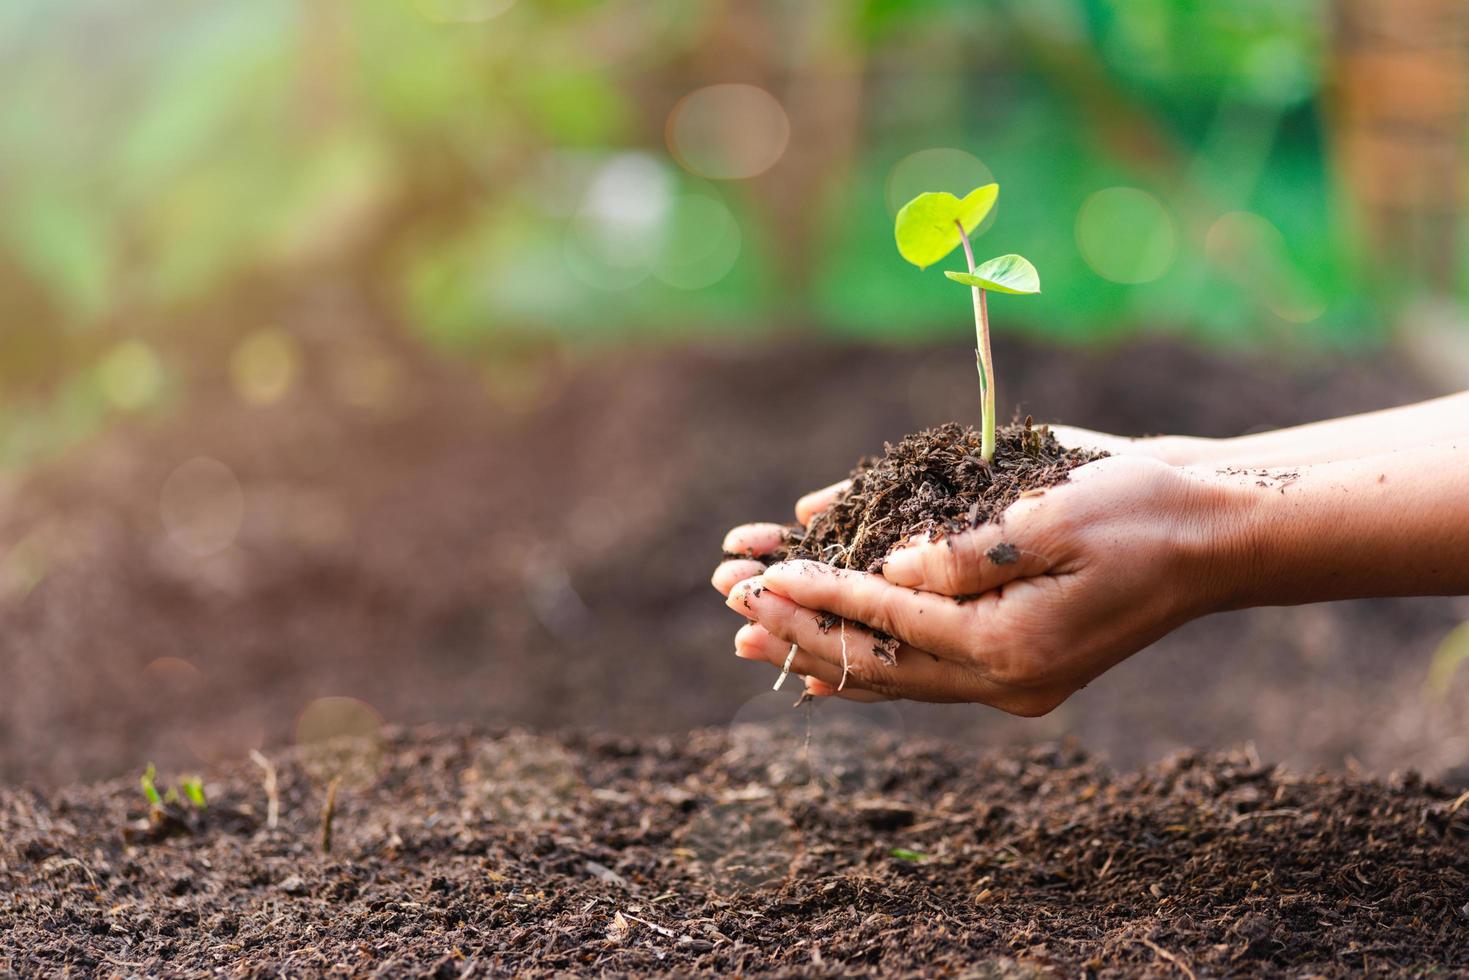 woman's hand with a tree She is planting, environmental conservation concept Protect and preserve resources plant trees to reduce global warming use renewable energy conservation of natural forests. photo